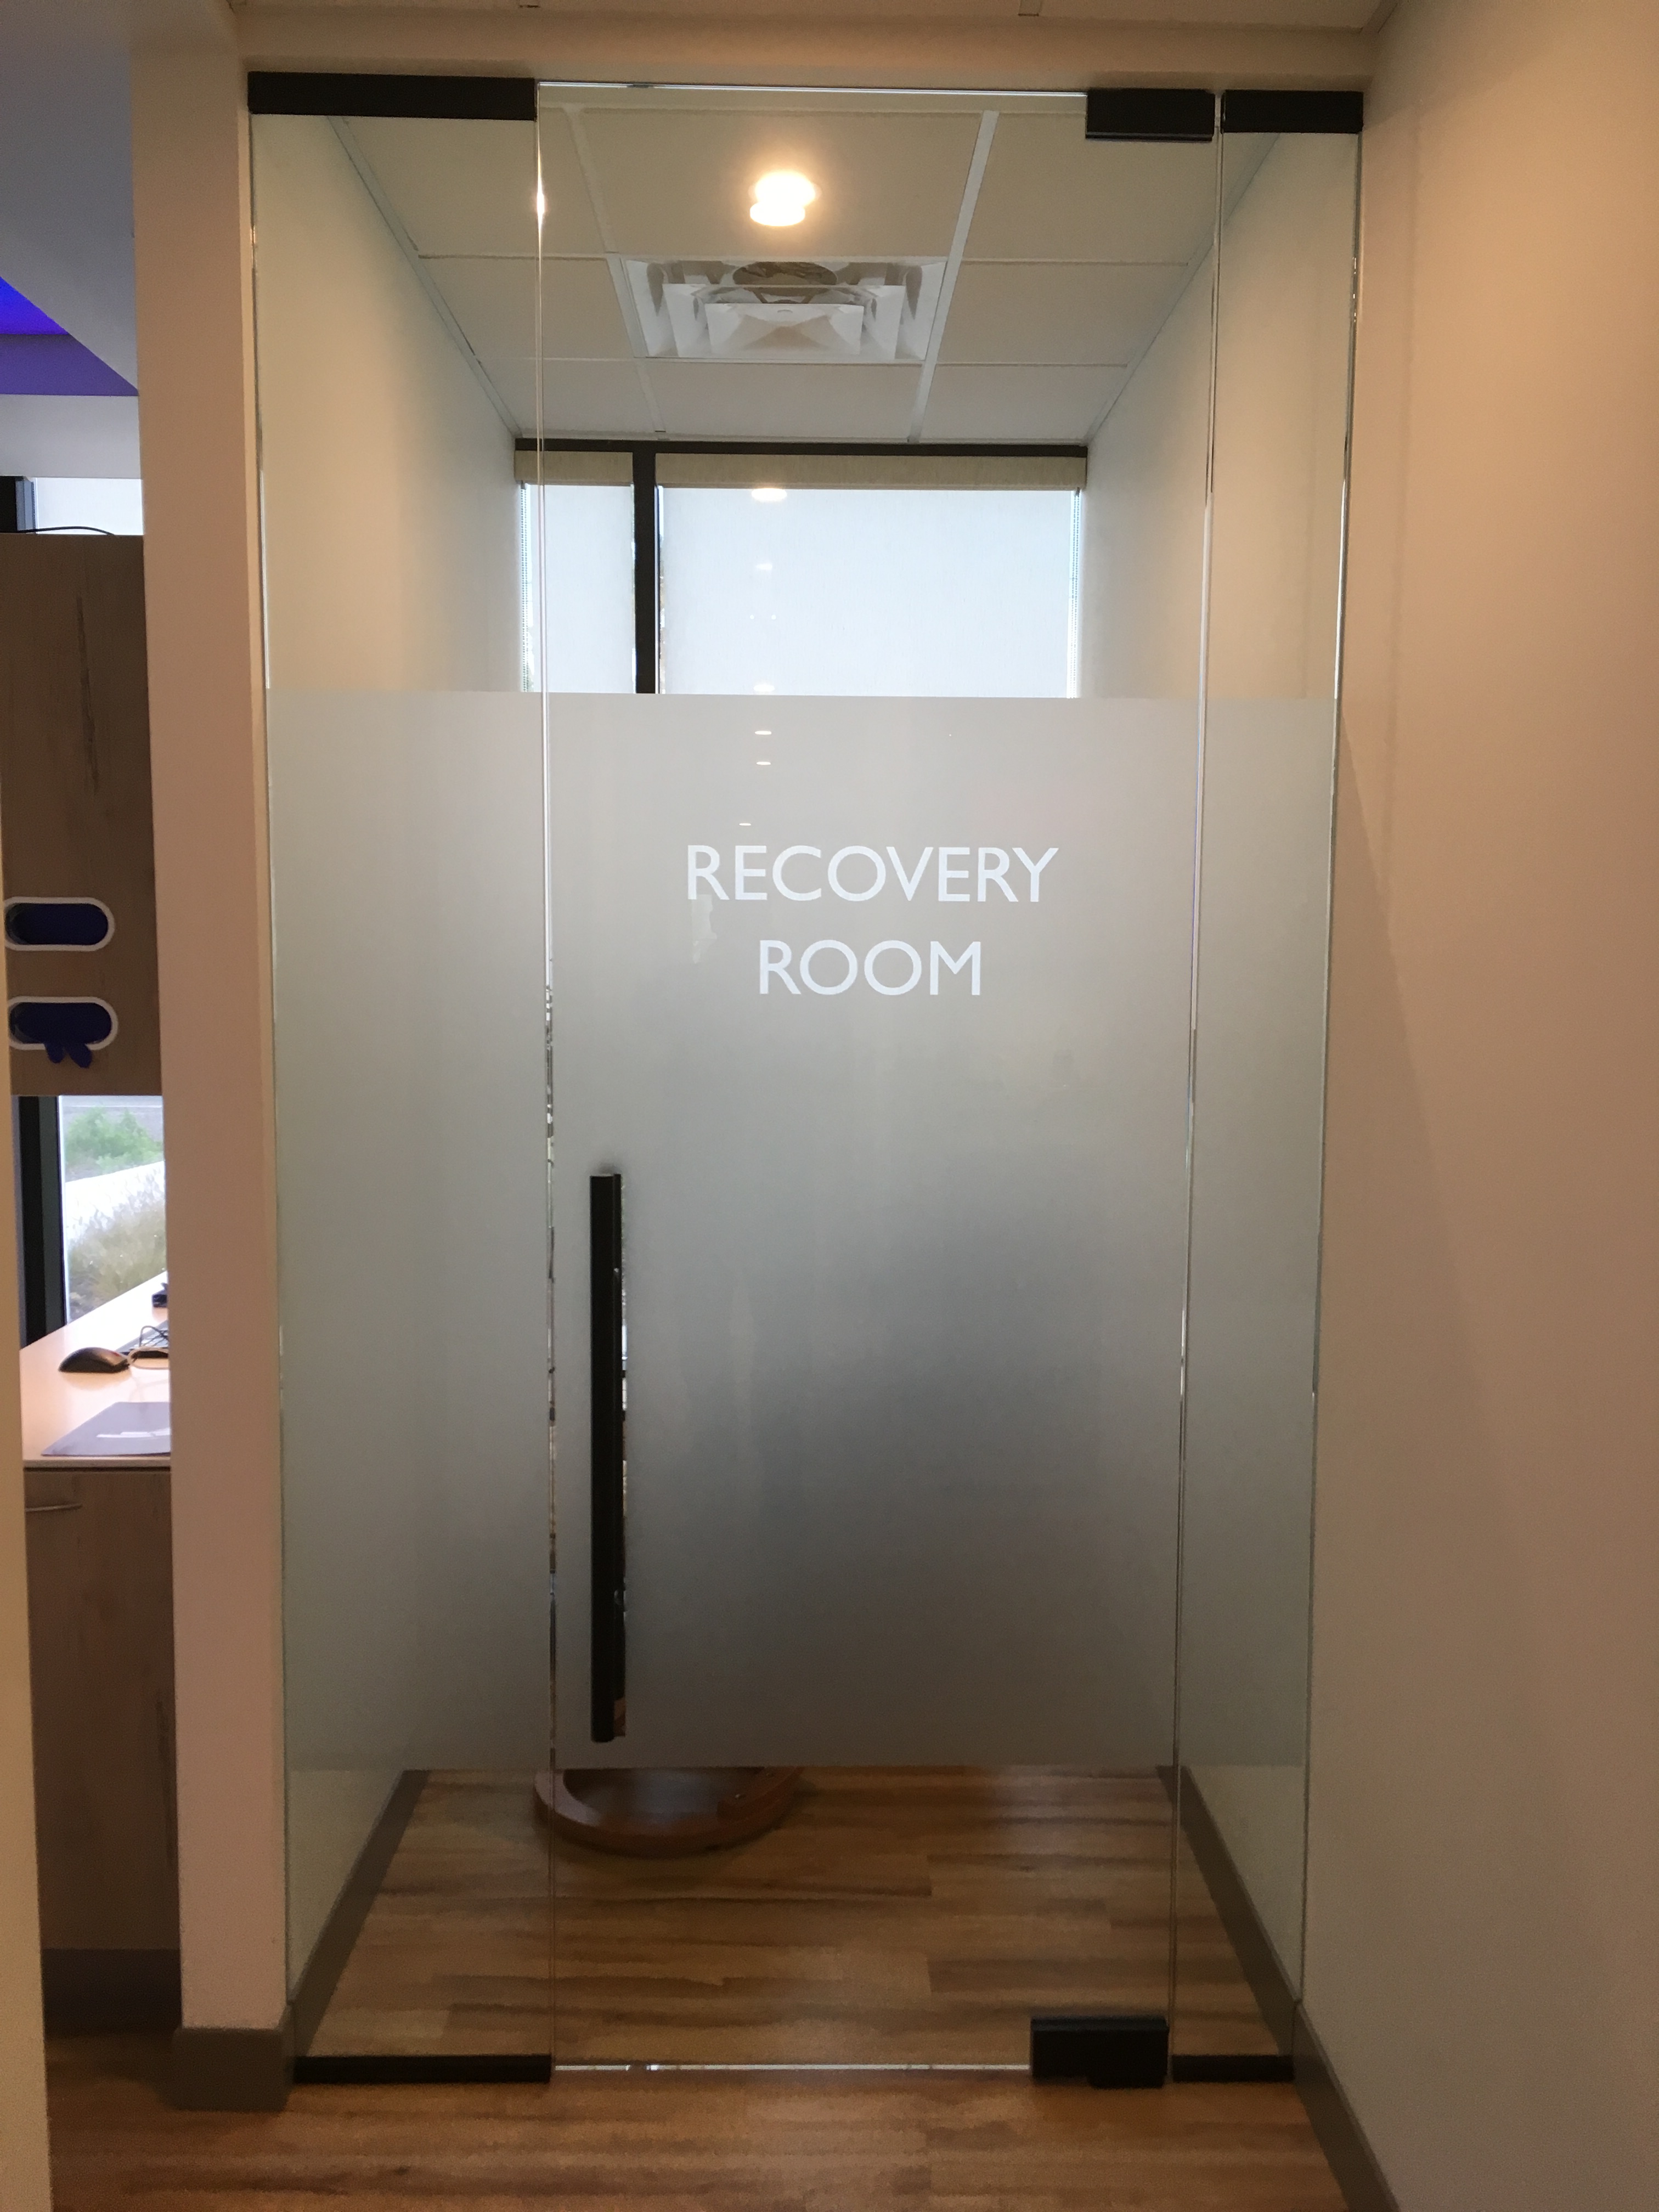 frost privacy glass with recovery room printed on